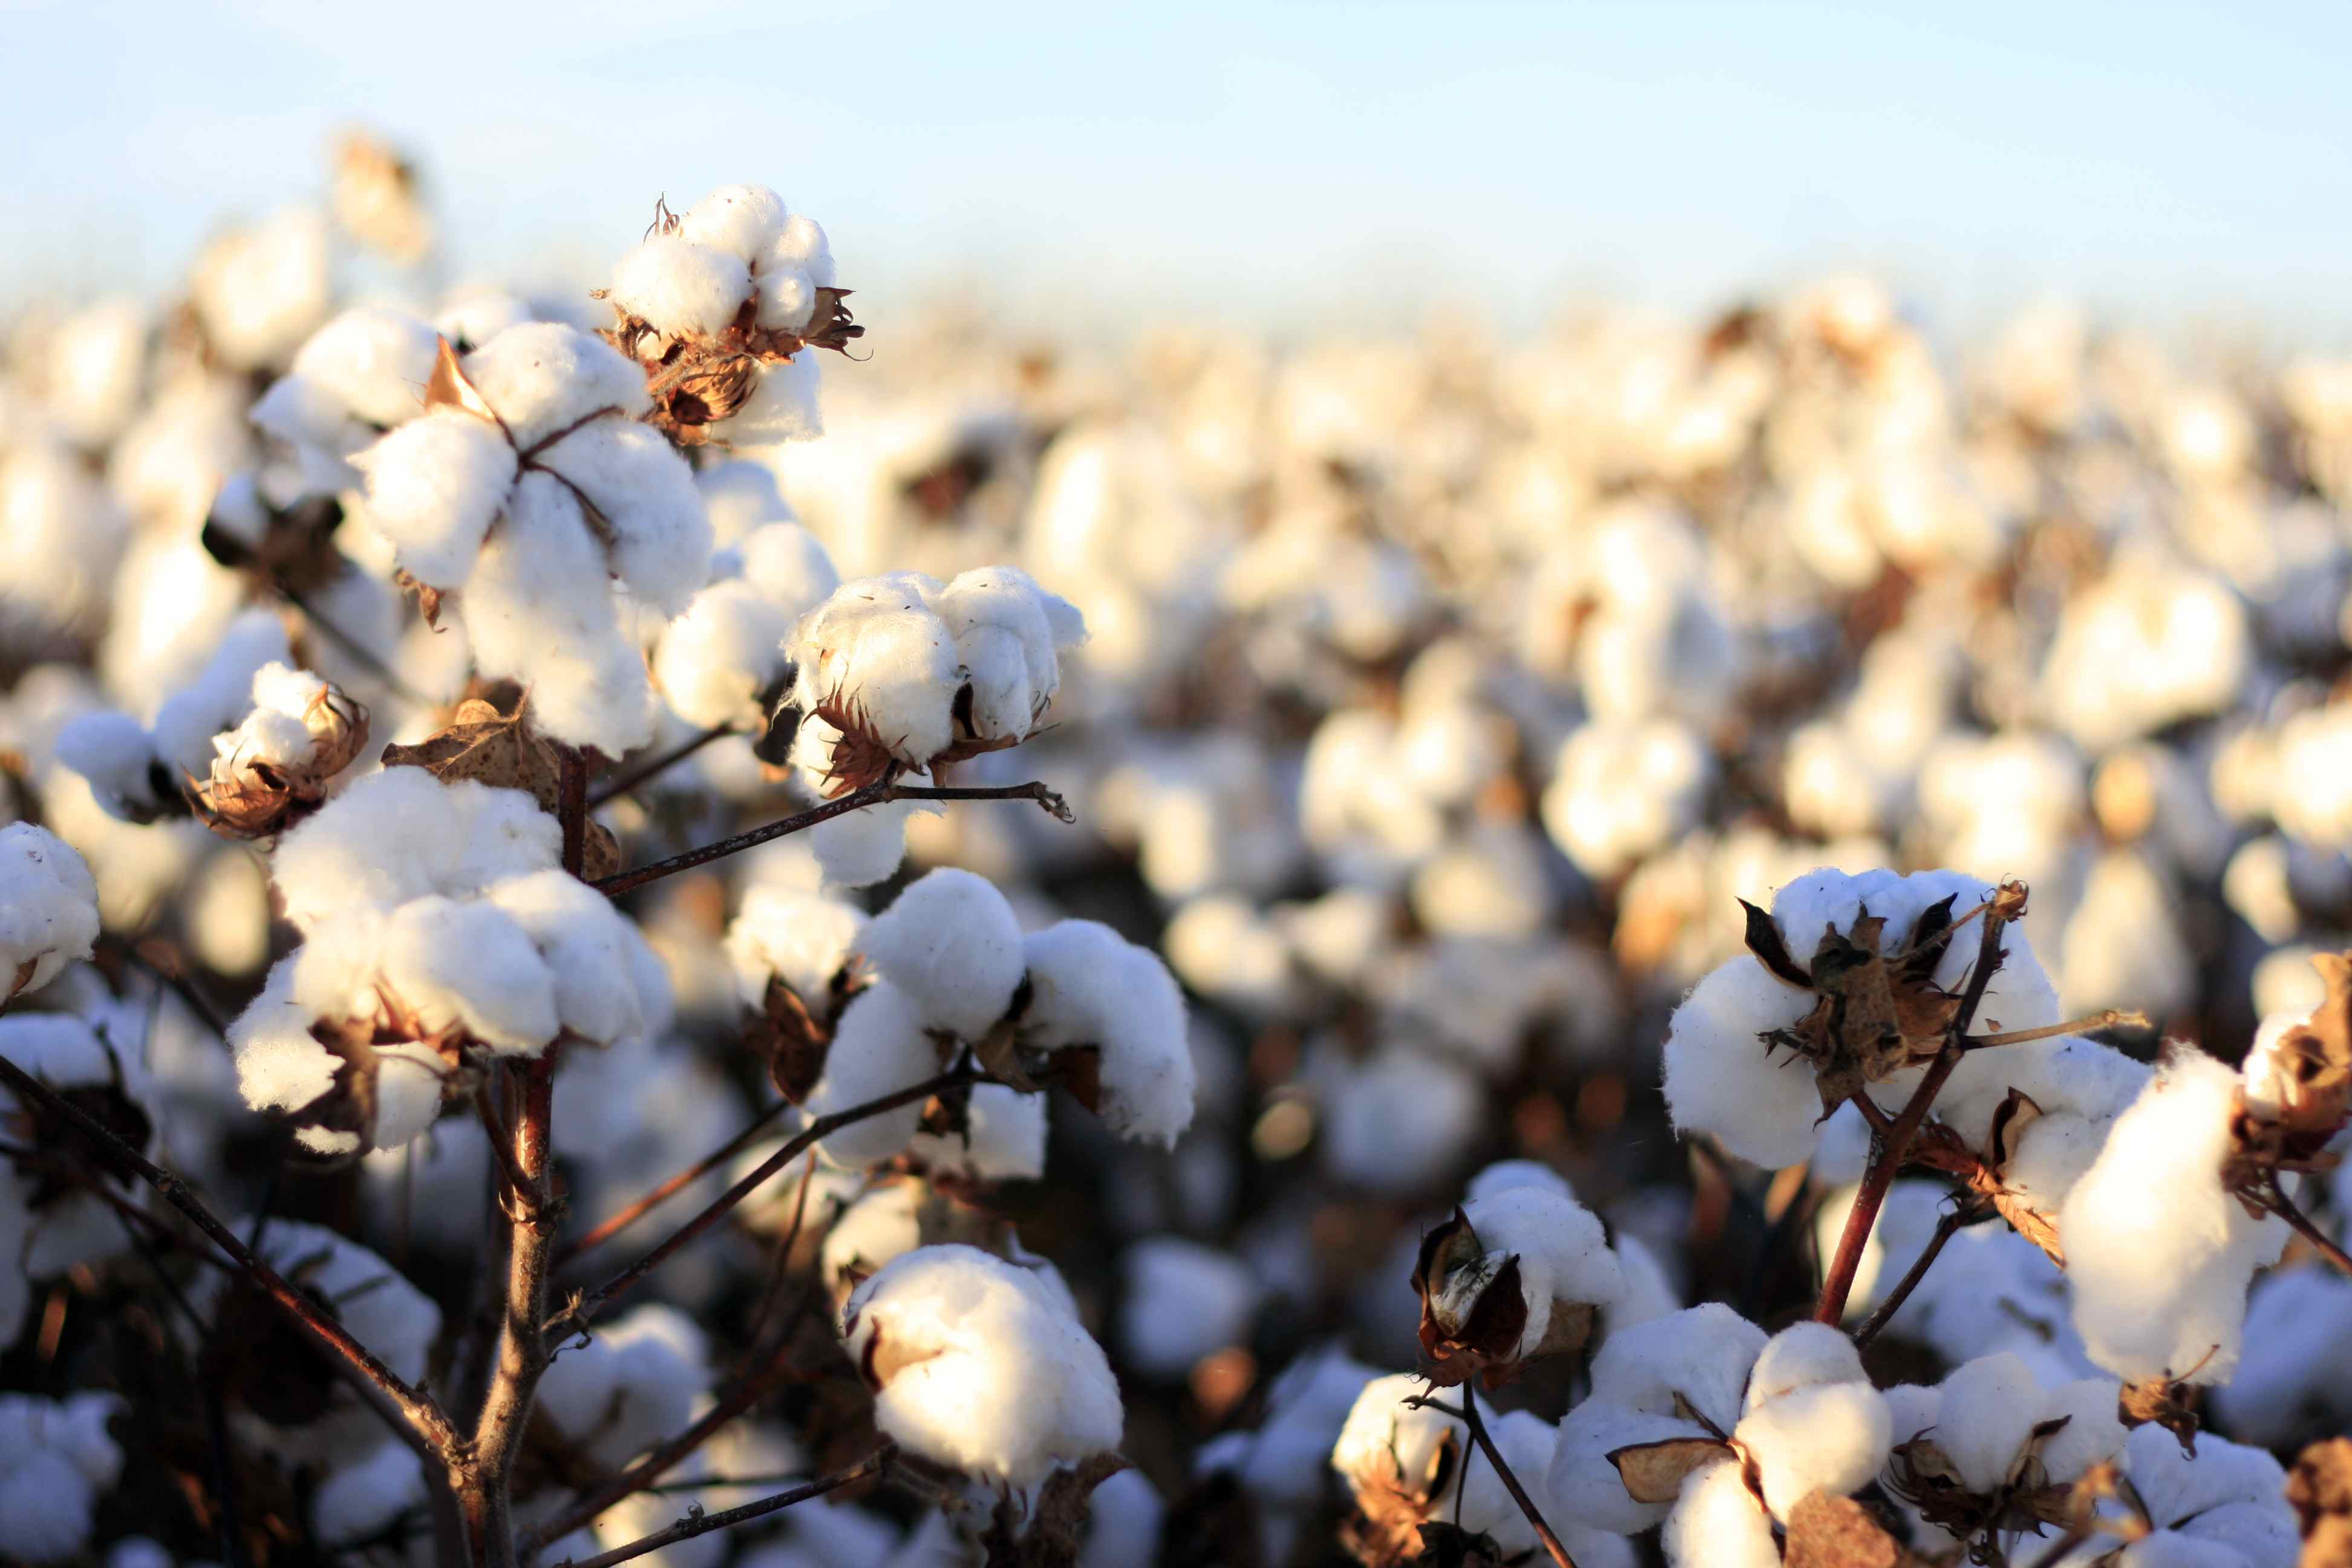 How Denim Is Made: Cotton and Its Benefits